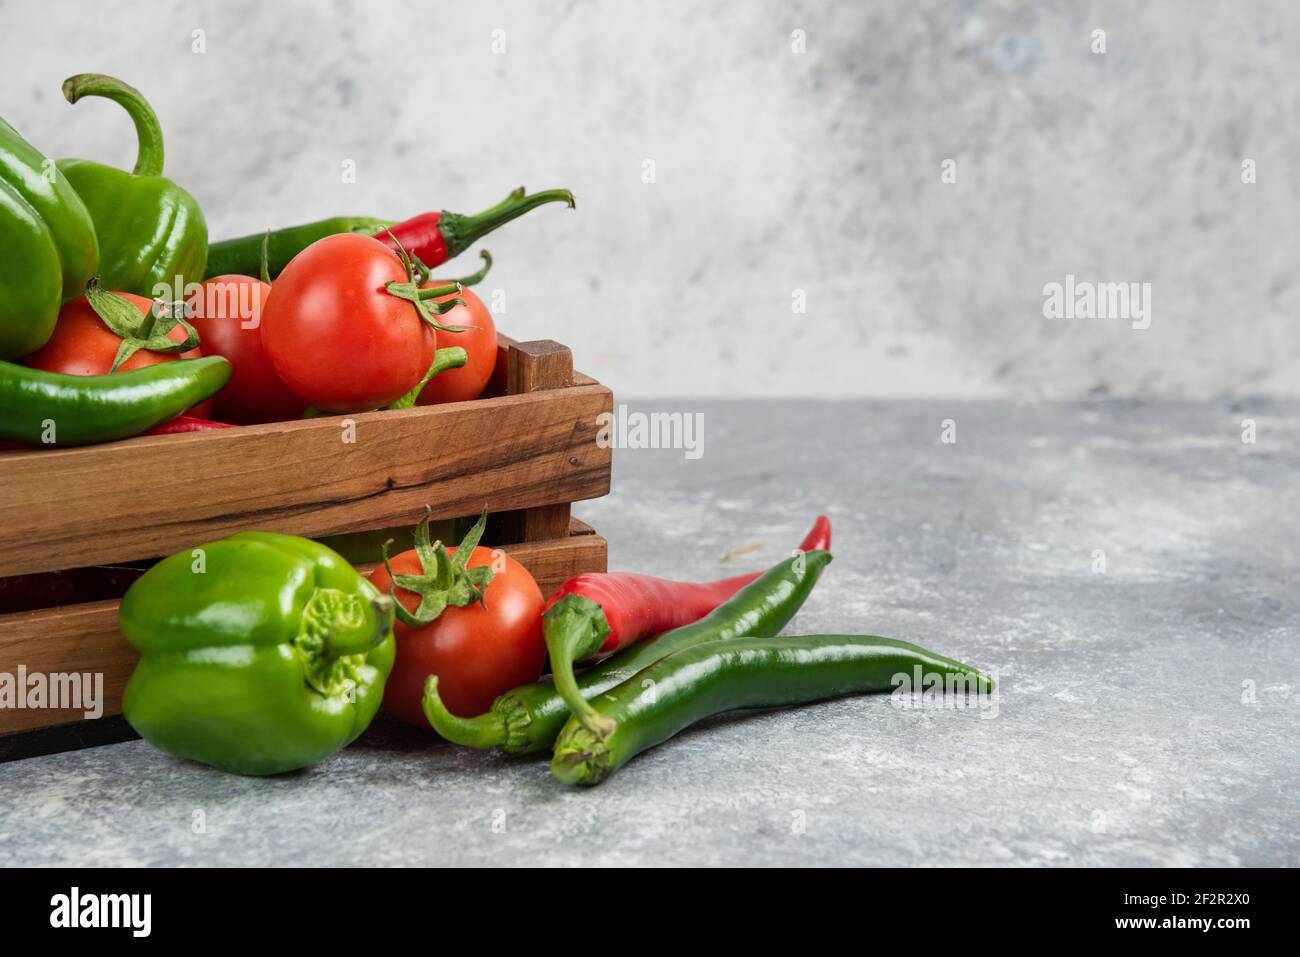 Wooden box full of fresh vegetables on marble background Stock Photo